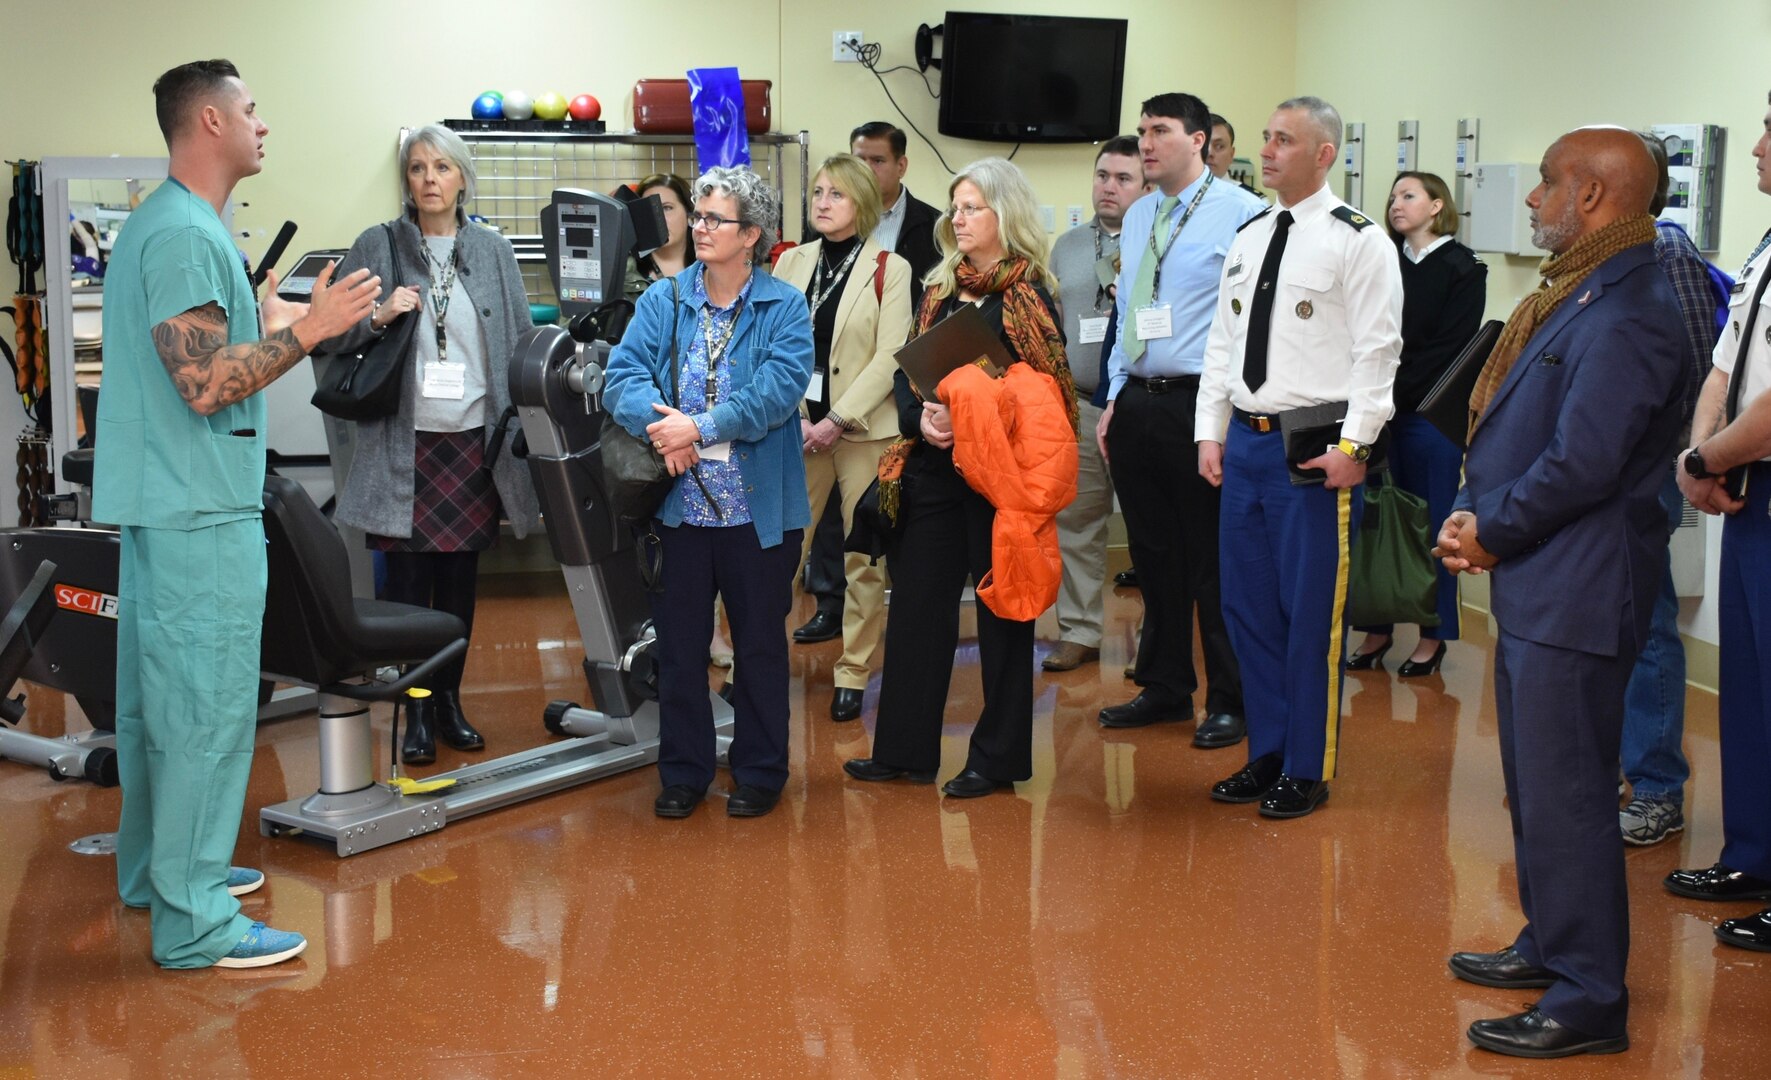 Medical school advisors are now part of what's called the Army Medical Experience. Pictured are advisors from several institutions that attended the tour.